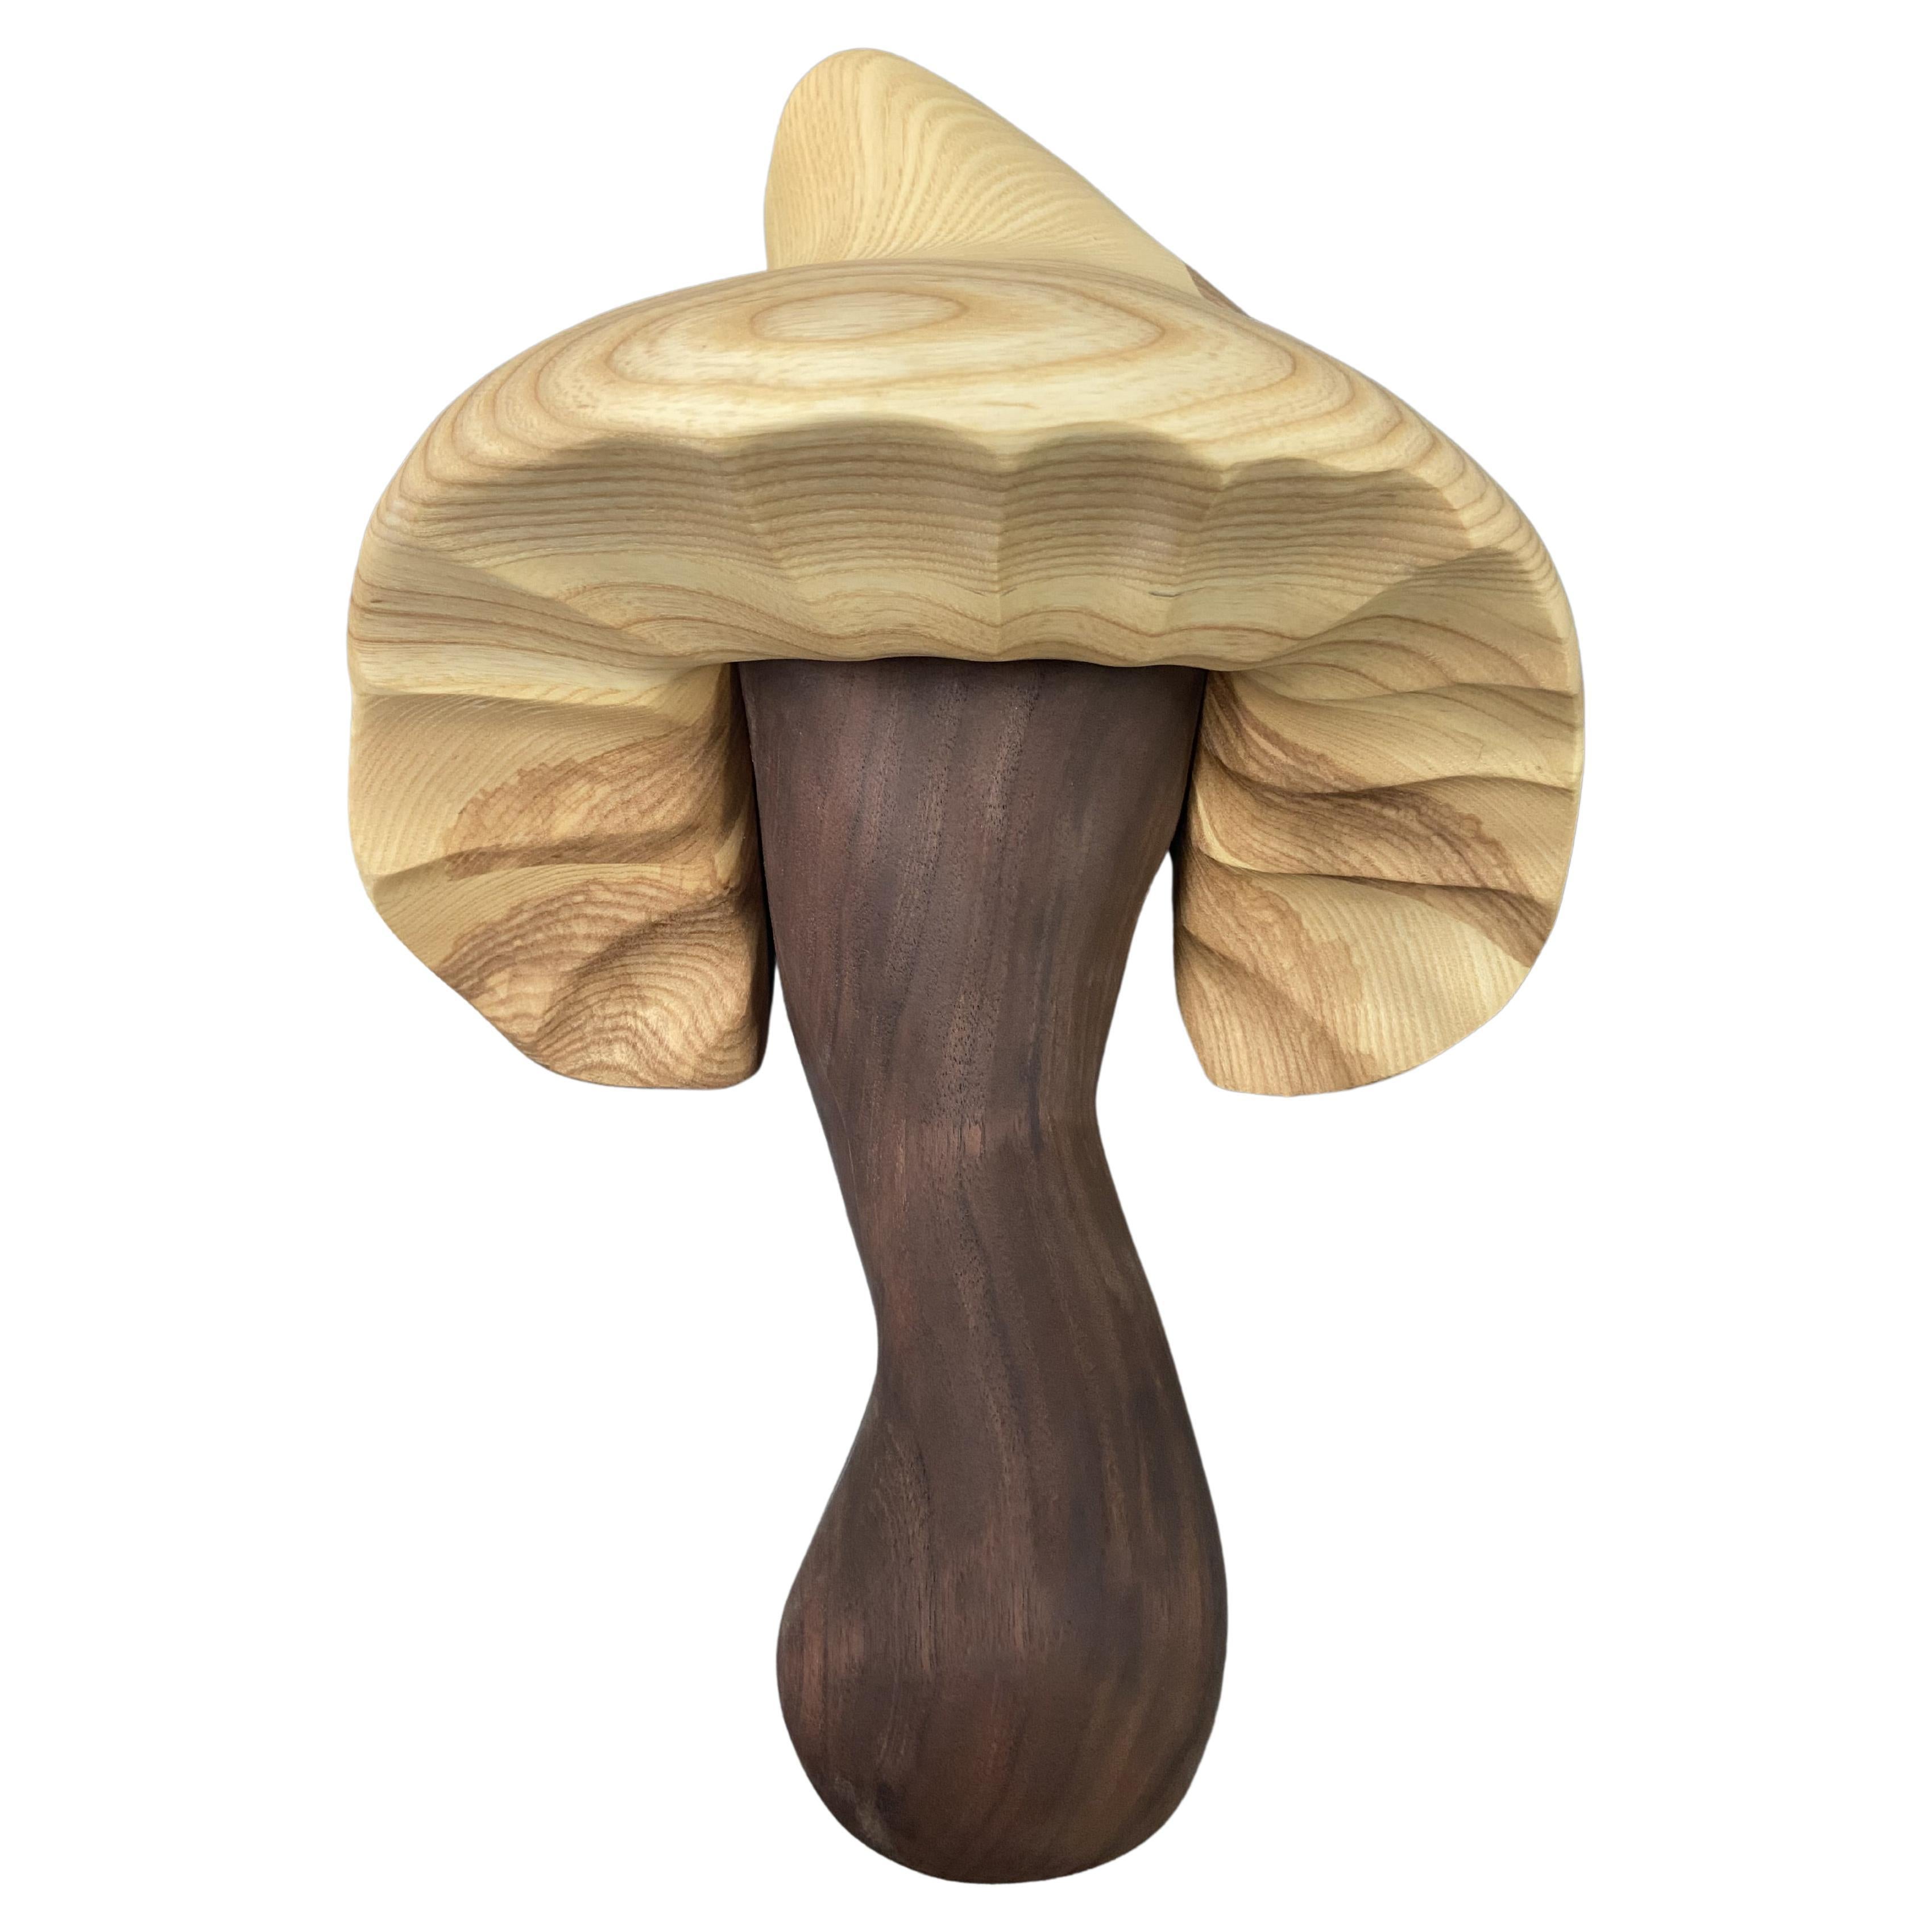 Hand-Carved Wall-Mounted Mushroom from Walnut and Ash